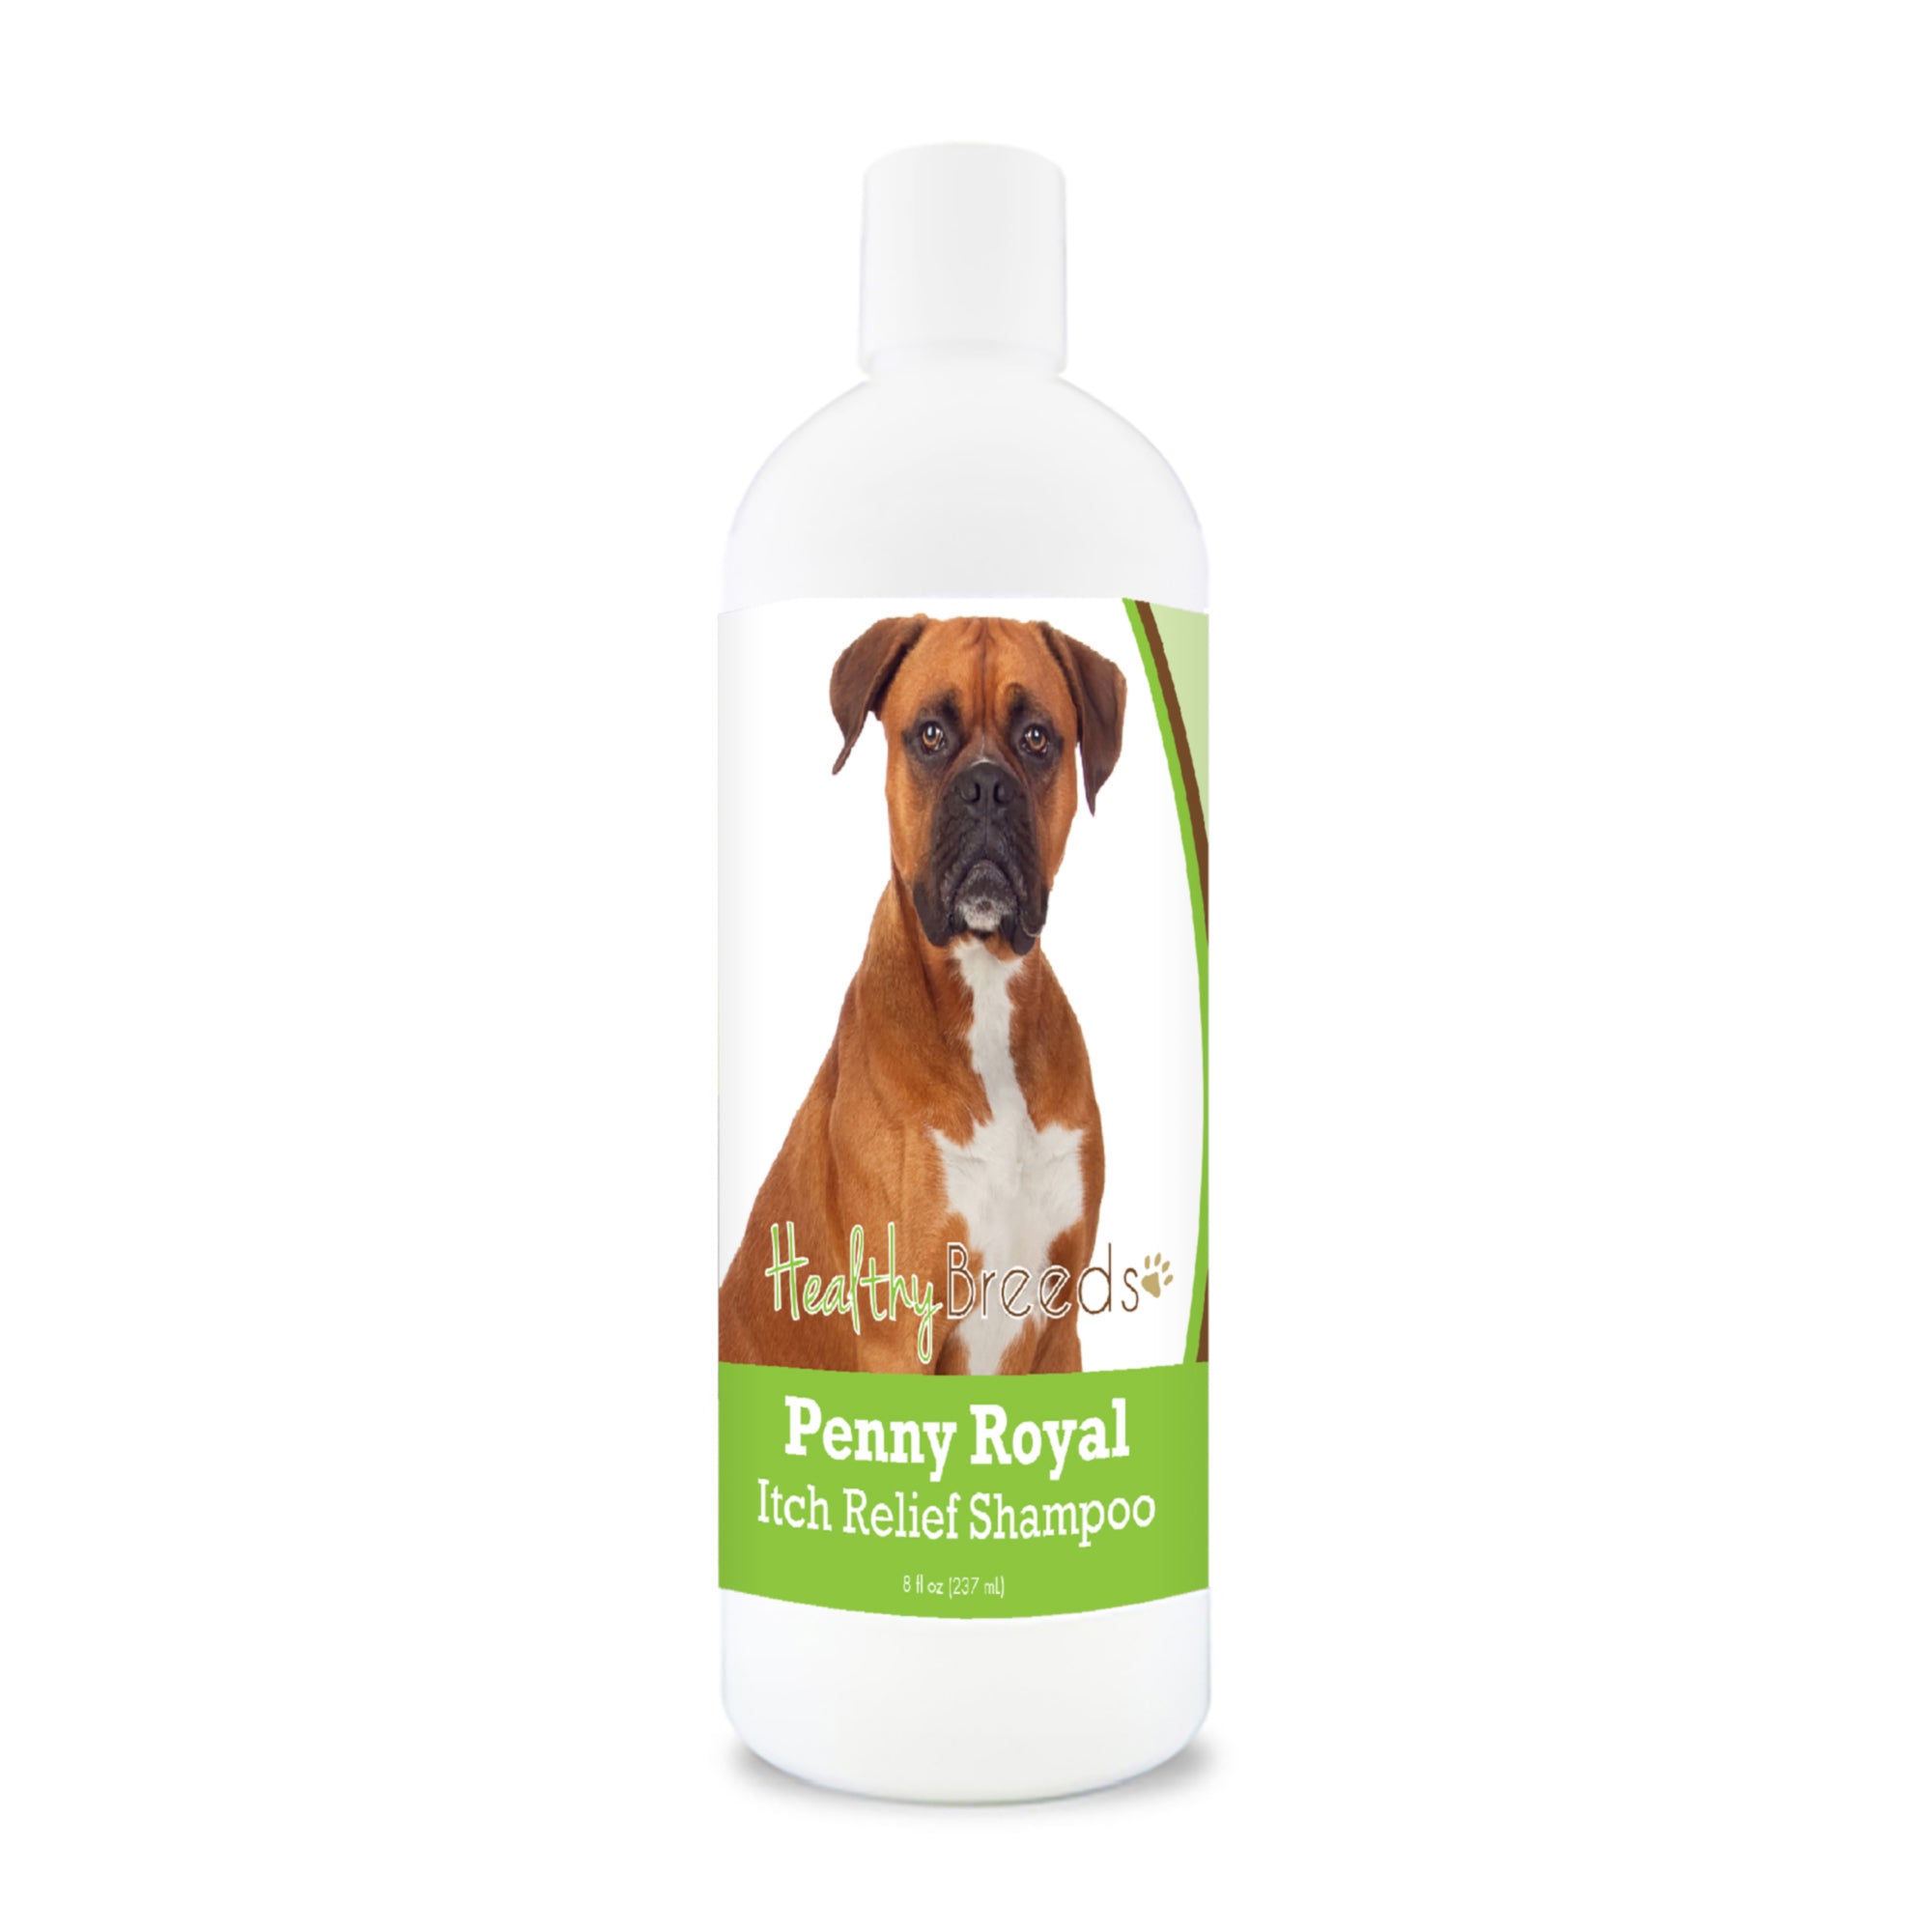 Boxer Penny Royal Itch Relief Shampoo 8 oz